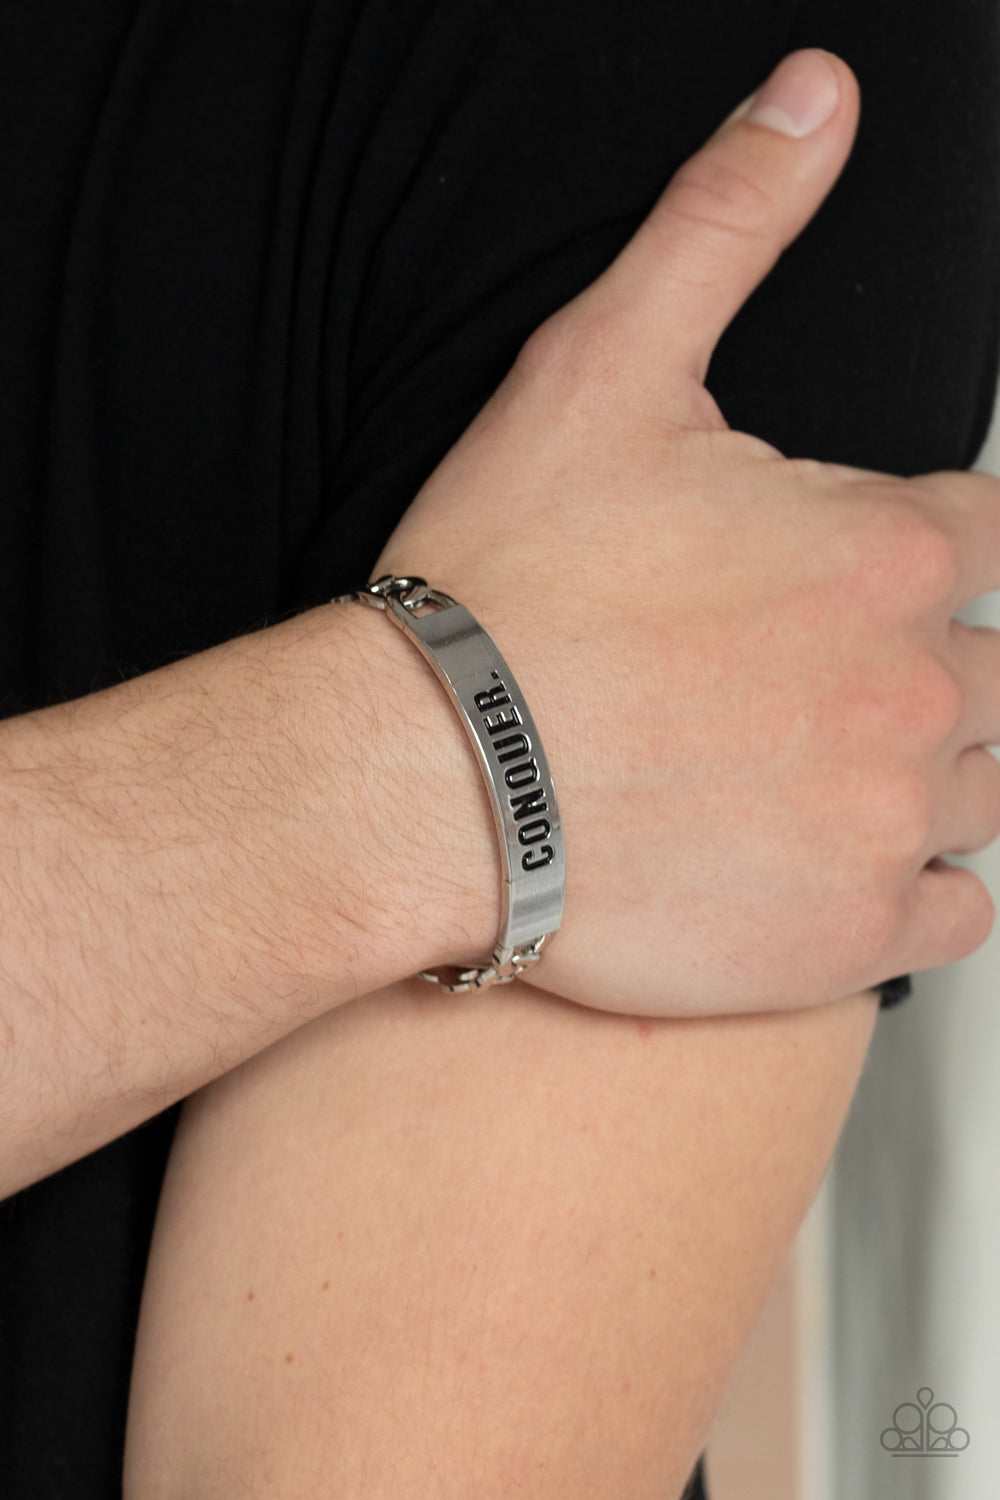 CONQUER YOUR FEARS - SILVER INSPIRATIONAL CUFF BRACELET